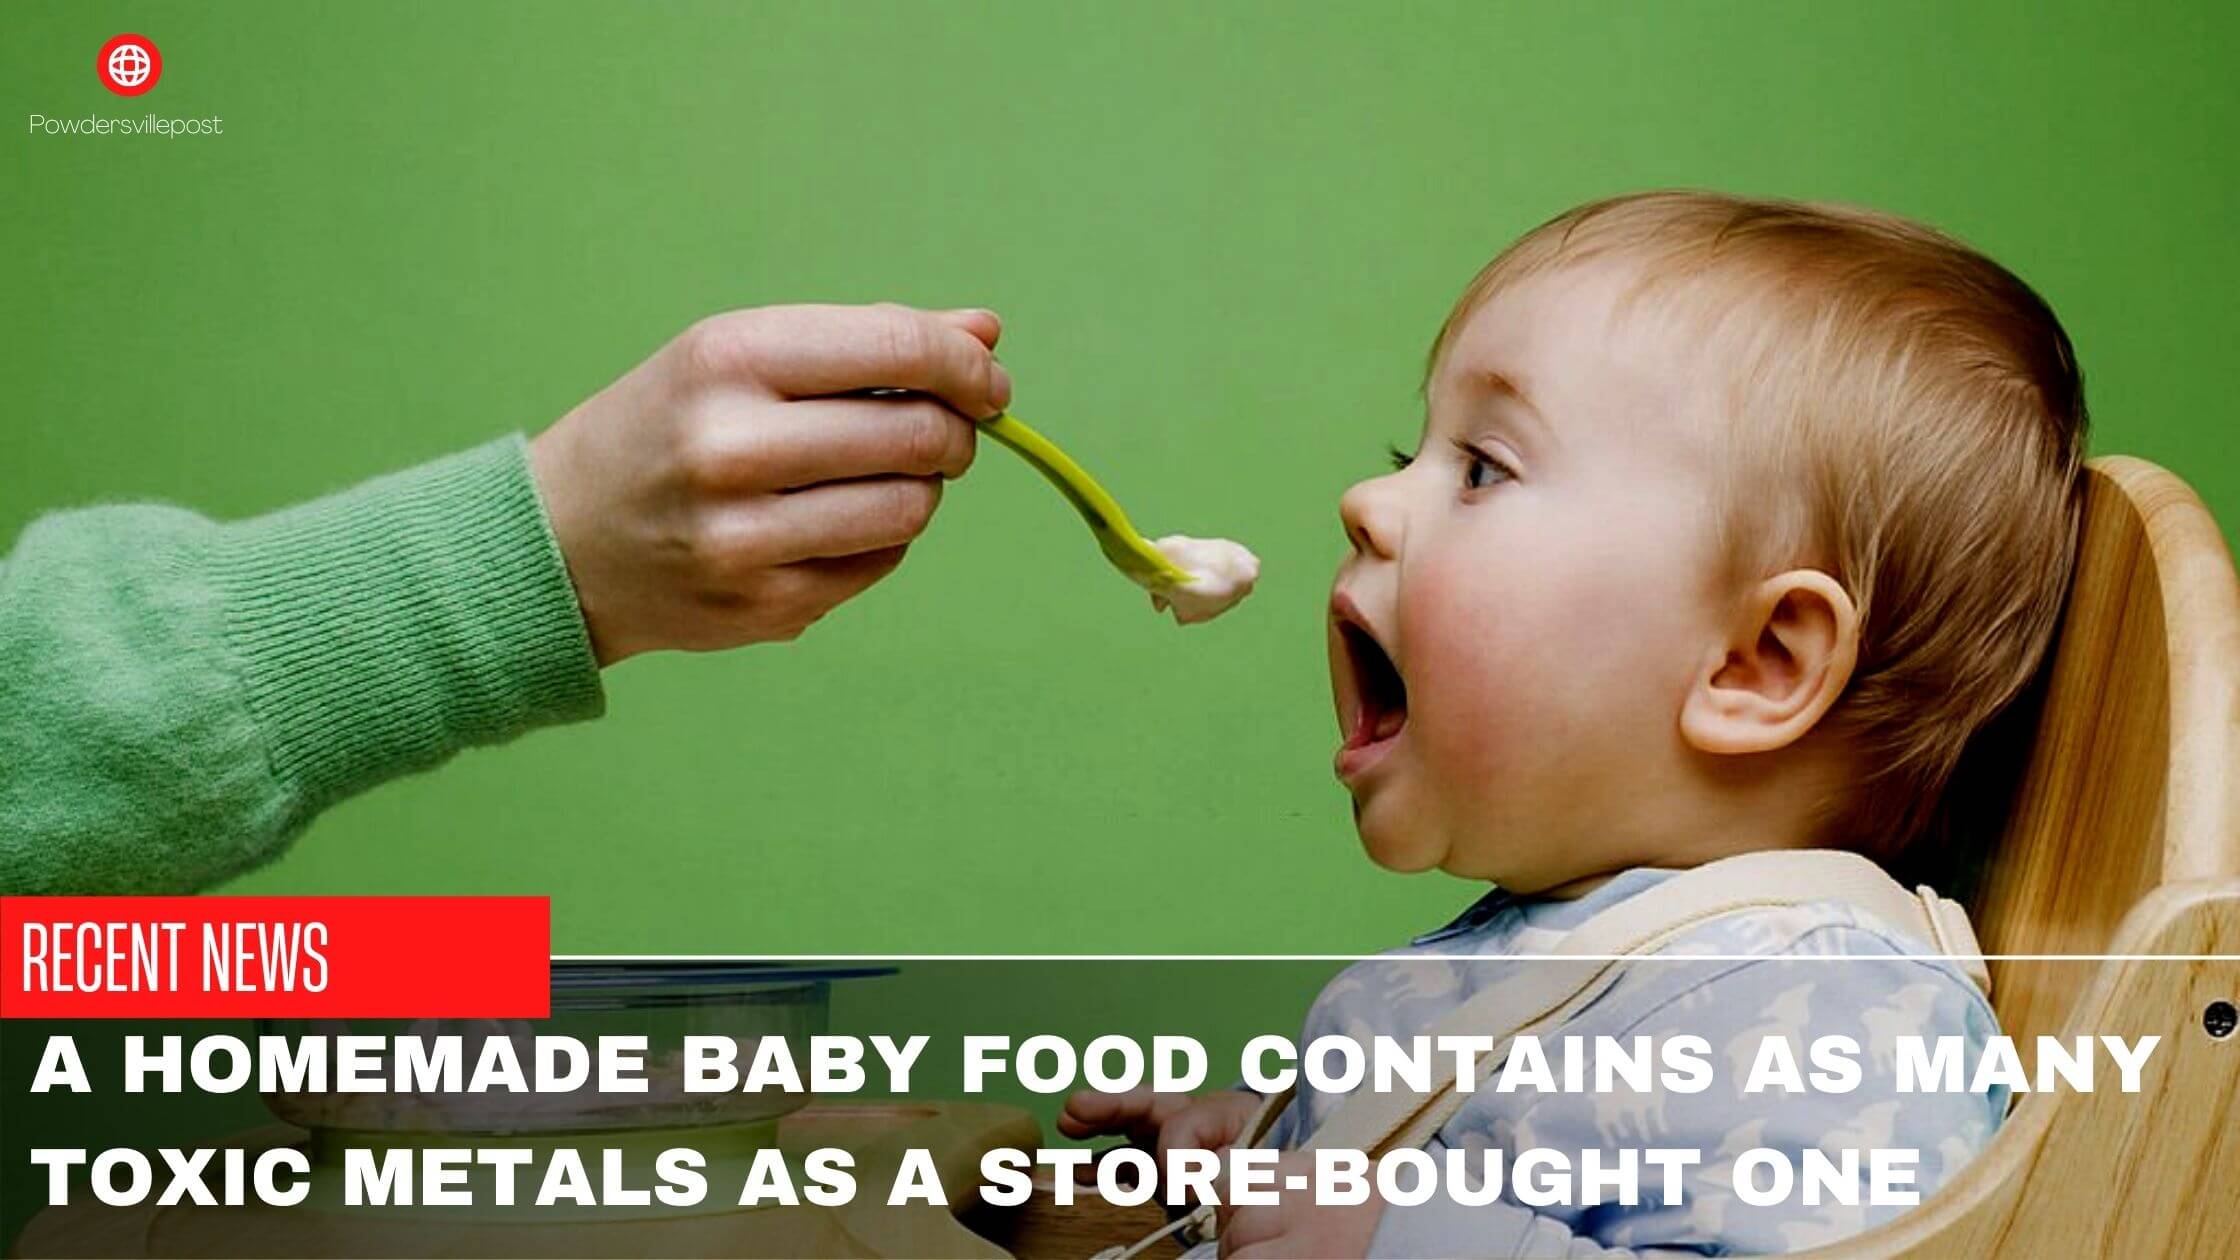 A Homemade Baby Food Contains As Many Toxic Metals As A Store-Bought One